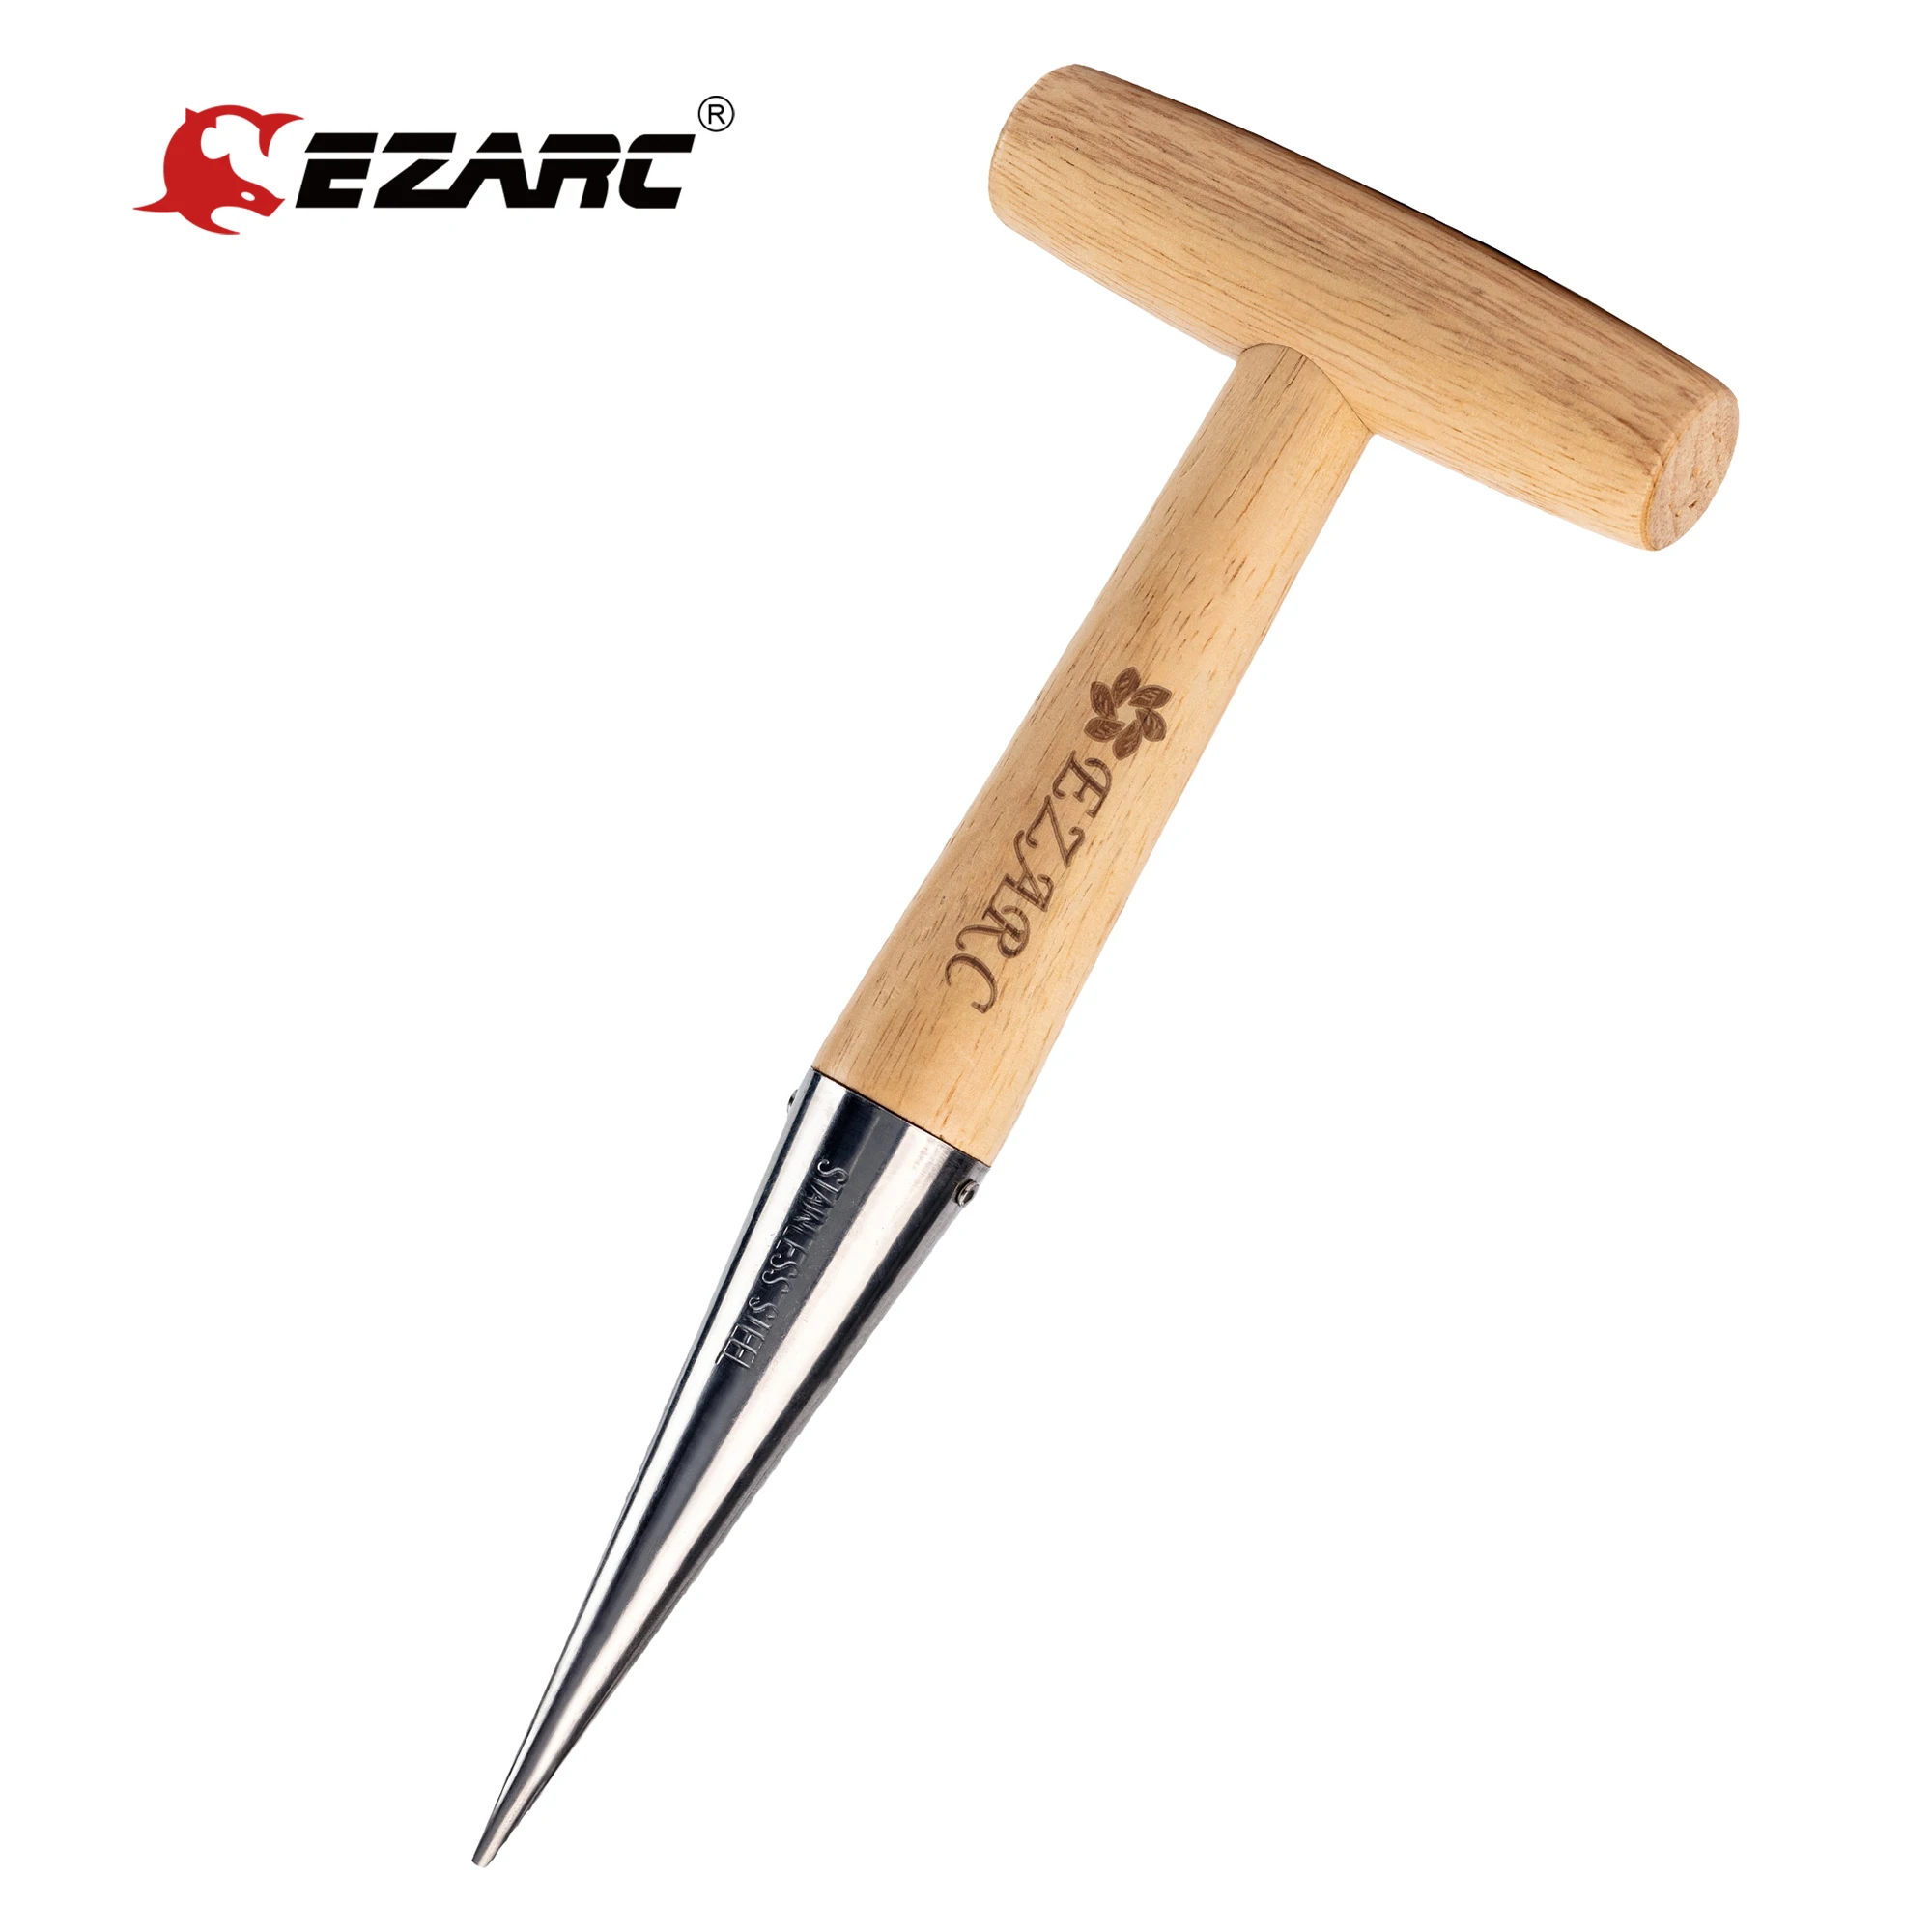 EZARC Garden Dibber, Made of Stainless Steel with Wooden Handle, Perfect for Your Seeding Transplants